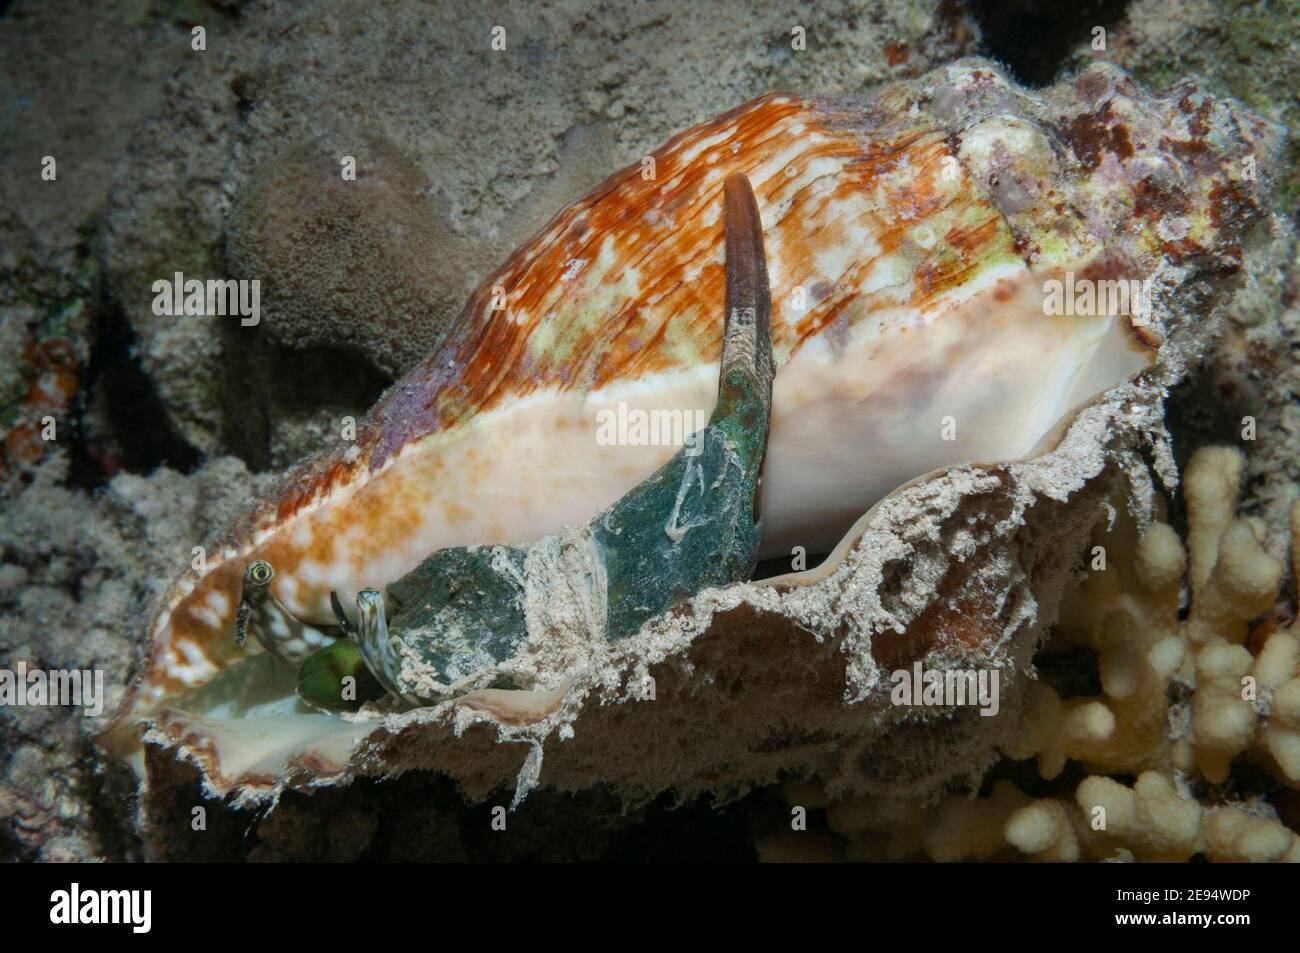 A Strombus mollusk with siphon raised up and eye stalk extended, Marsa Alam, Egypt Stock Photo